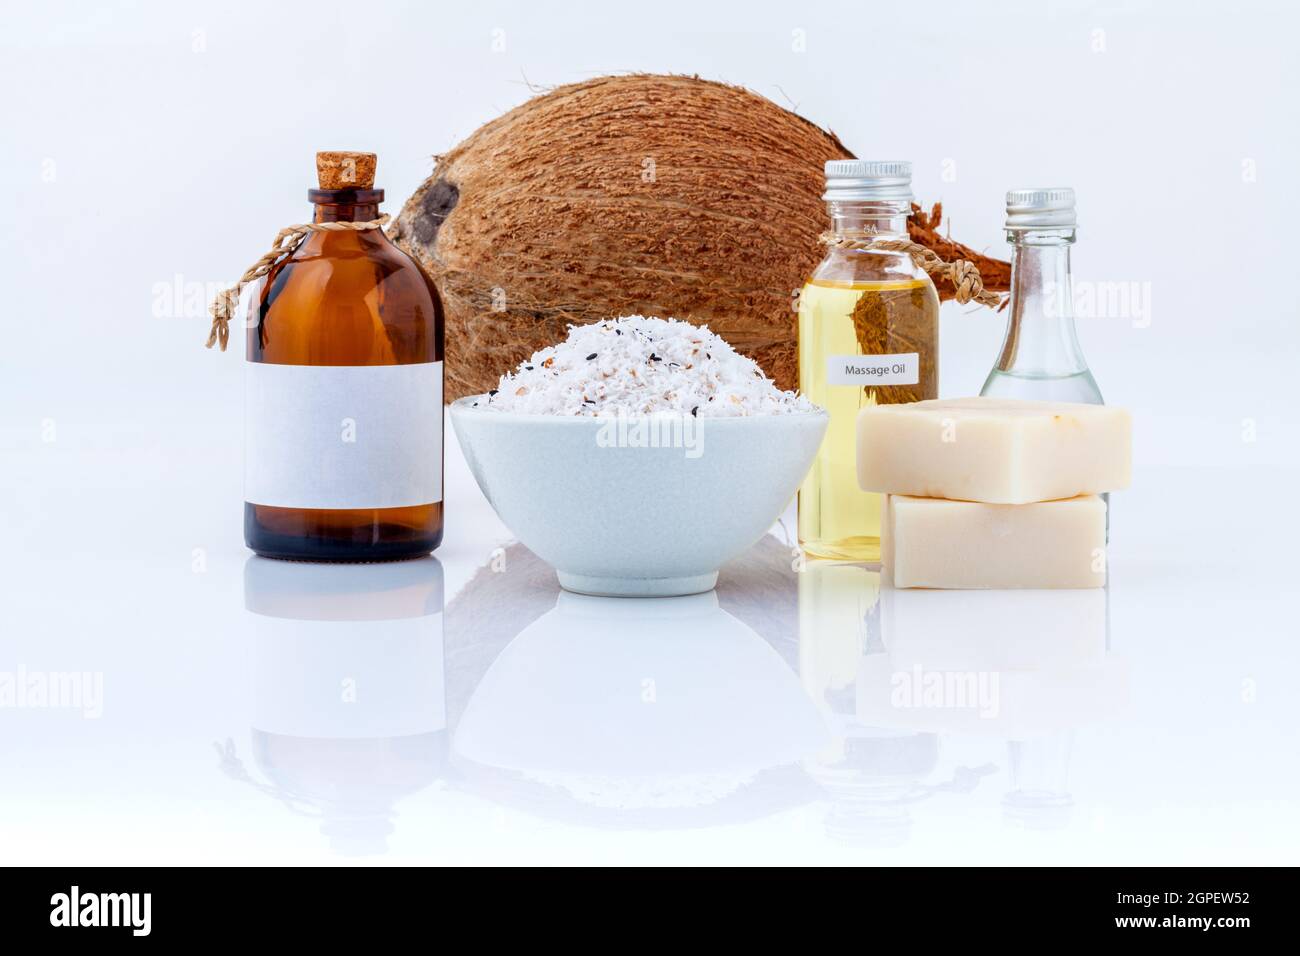 Coconut essential Oils natural Spa Ingredients for scrub ,massage and skin care isolate on white background. Stock Photo